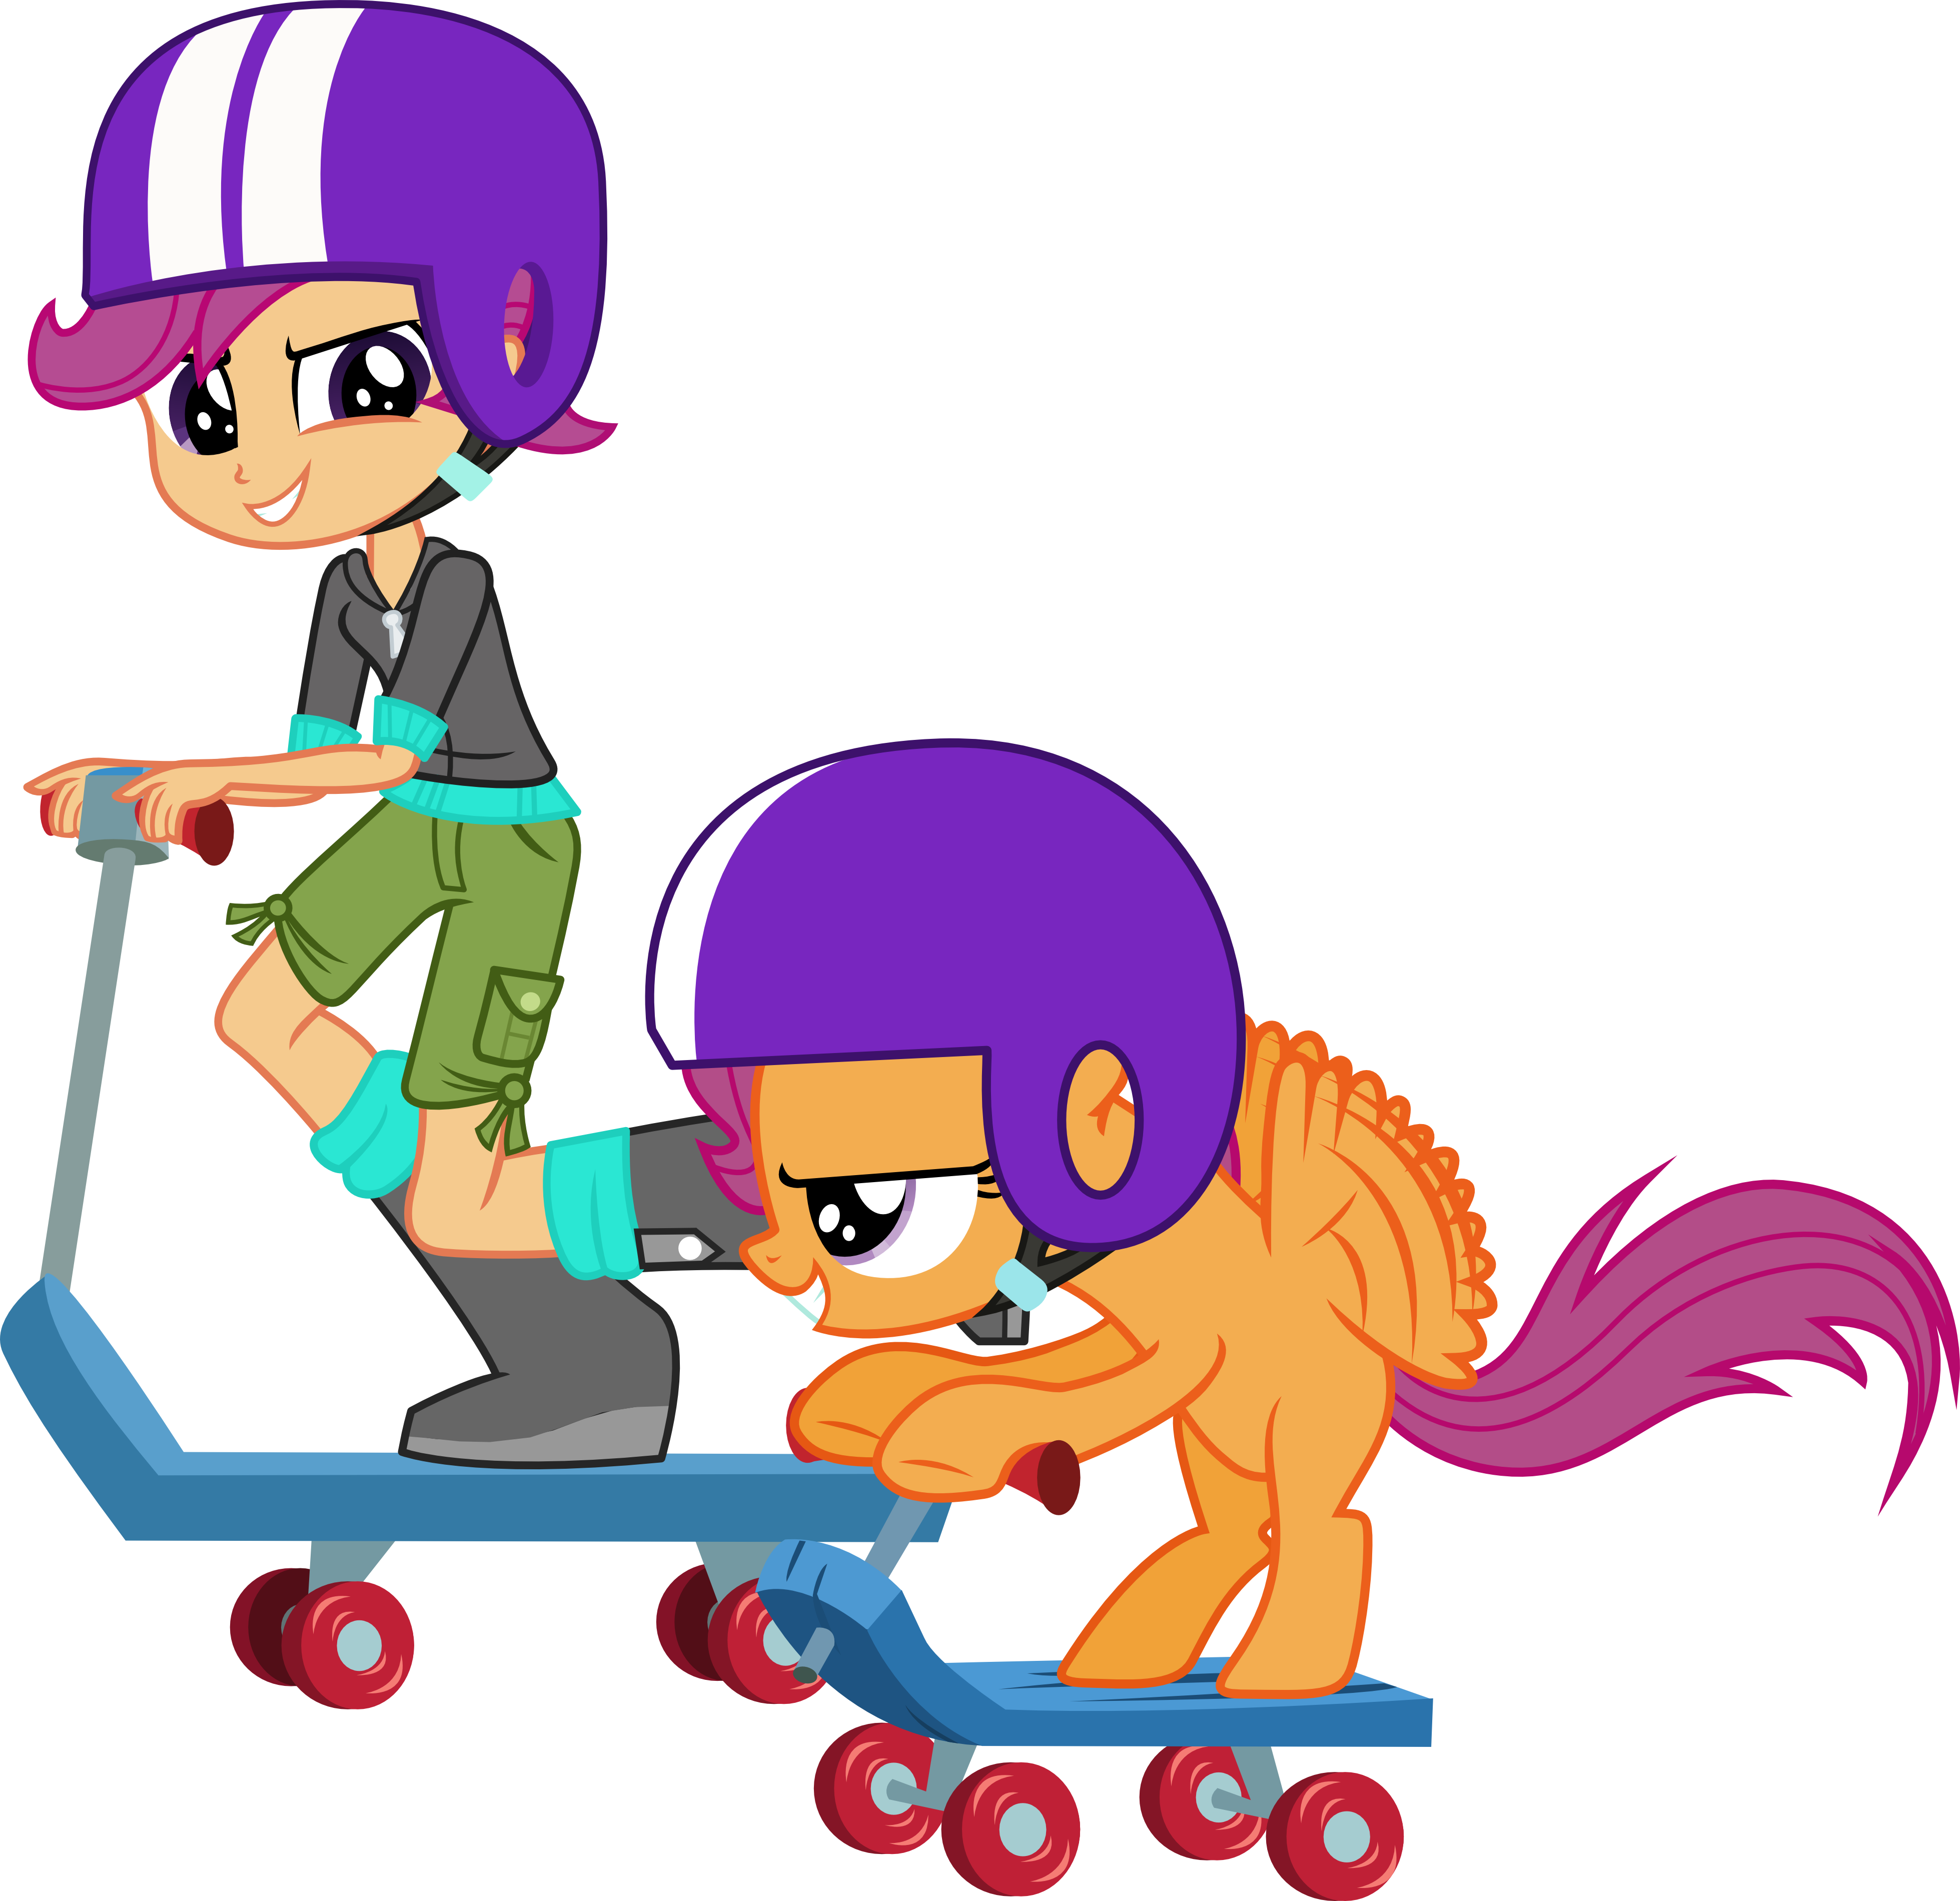 scootaloo_and_scootaloo_by_hampshireukbr